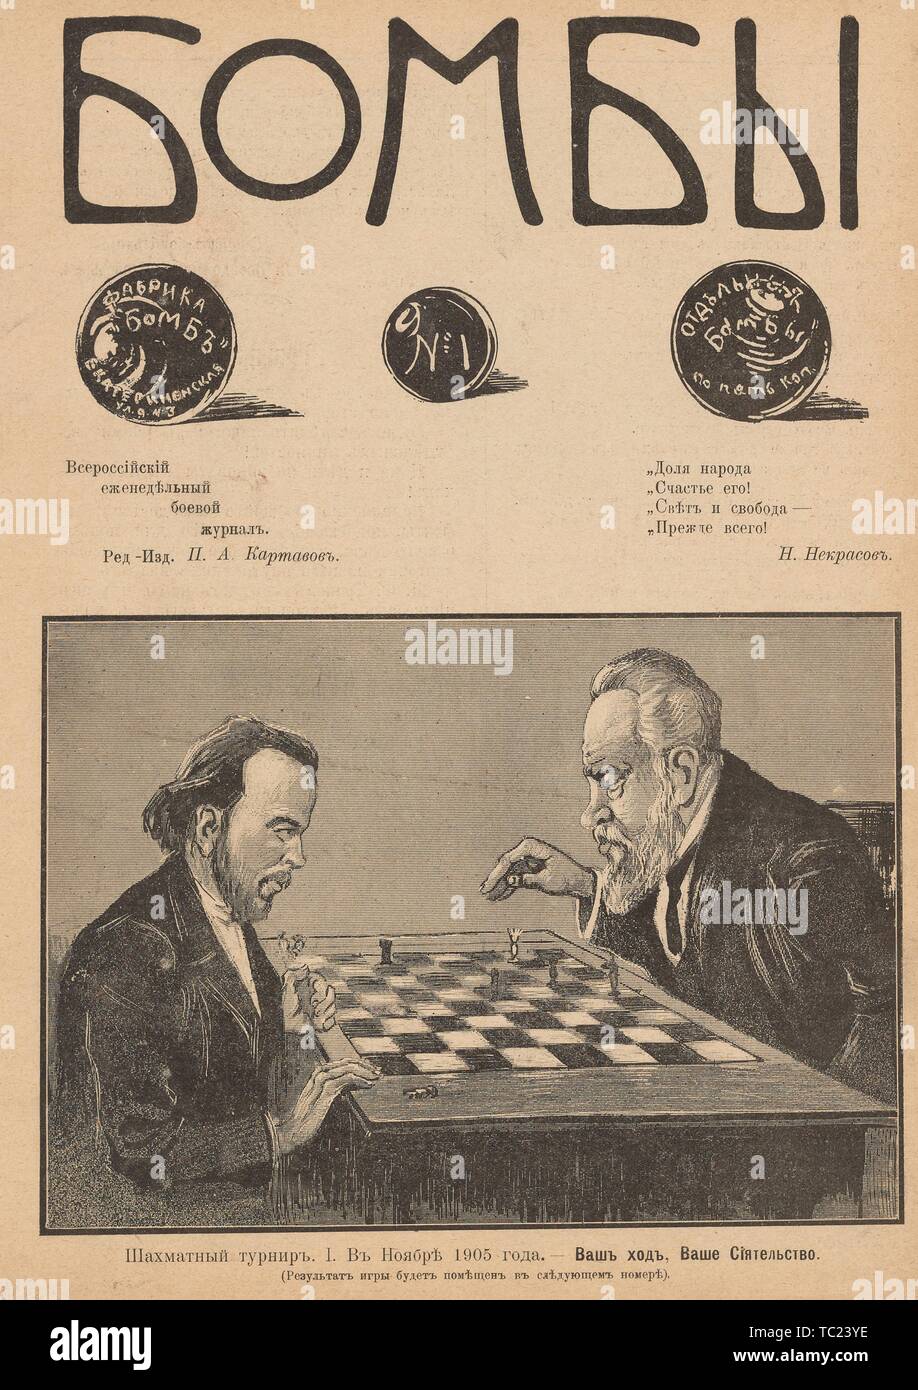 Cover of the Russian satirical journal Bomby, with illustration depicting two men playing chess, 1905. () Stock Photo